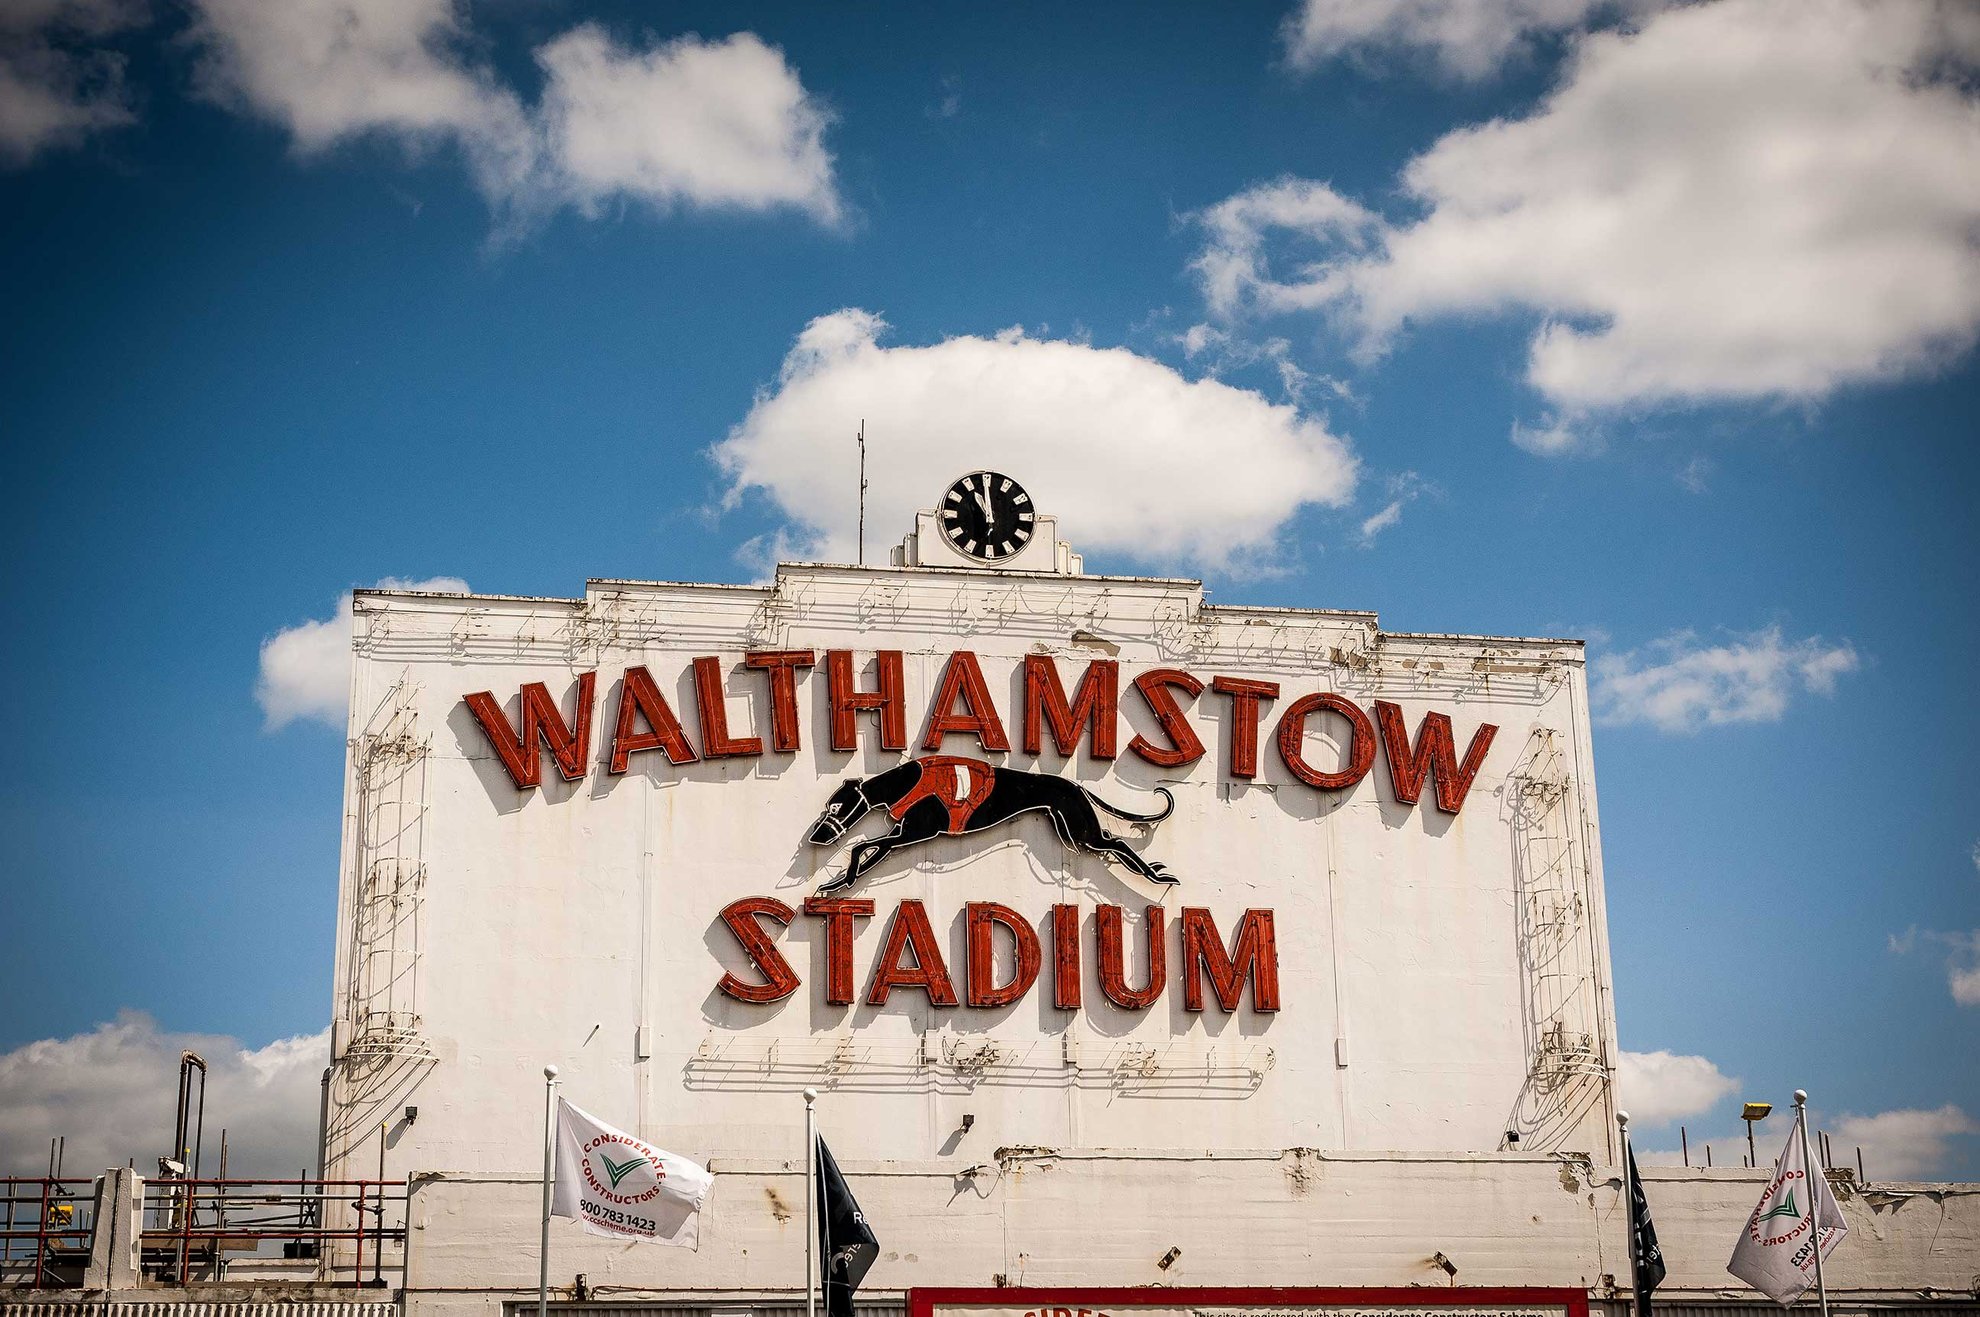 The famous Walthamstow Stadium frontage